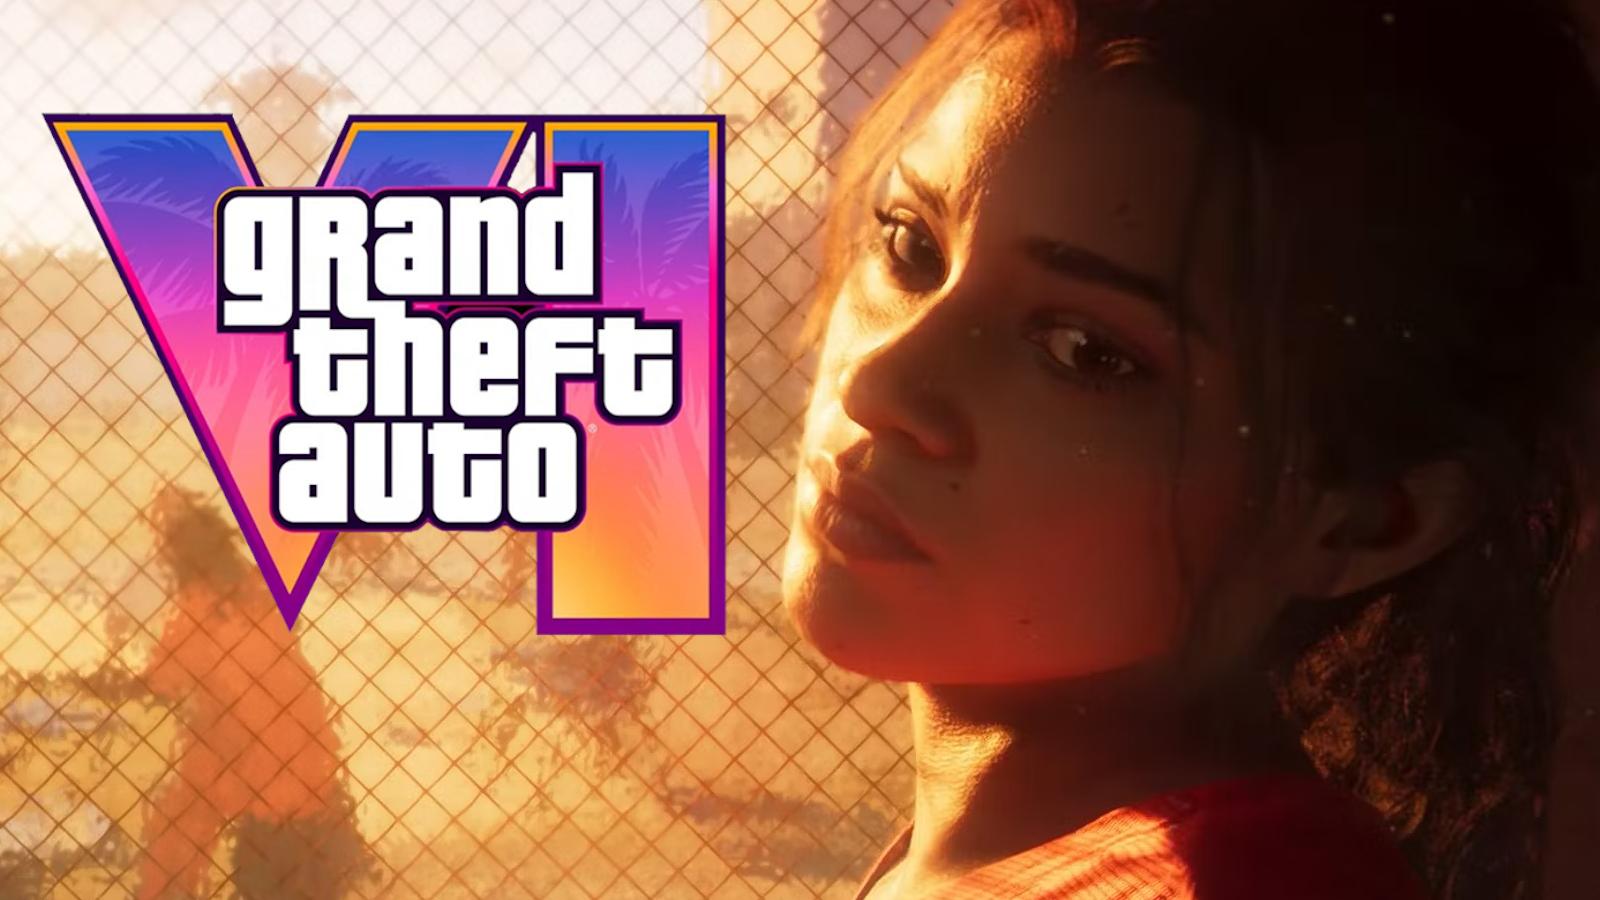 lucia in jail next to gta 6 logo